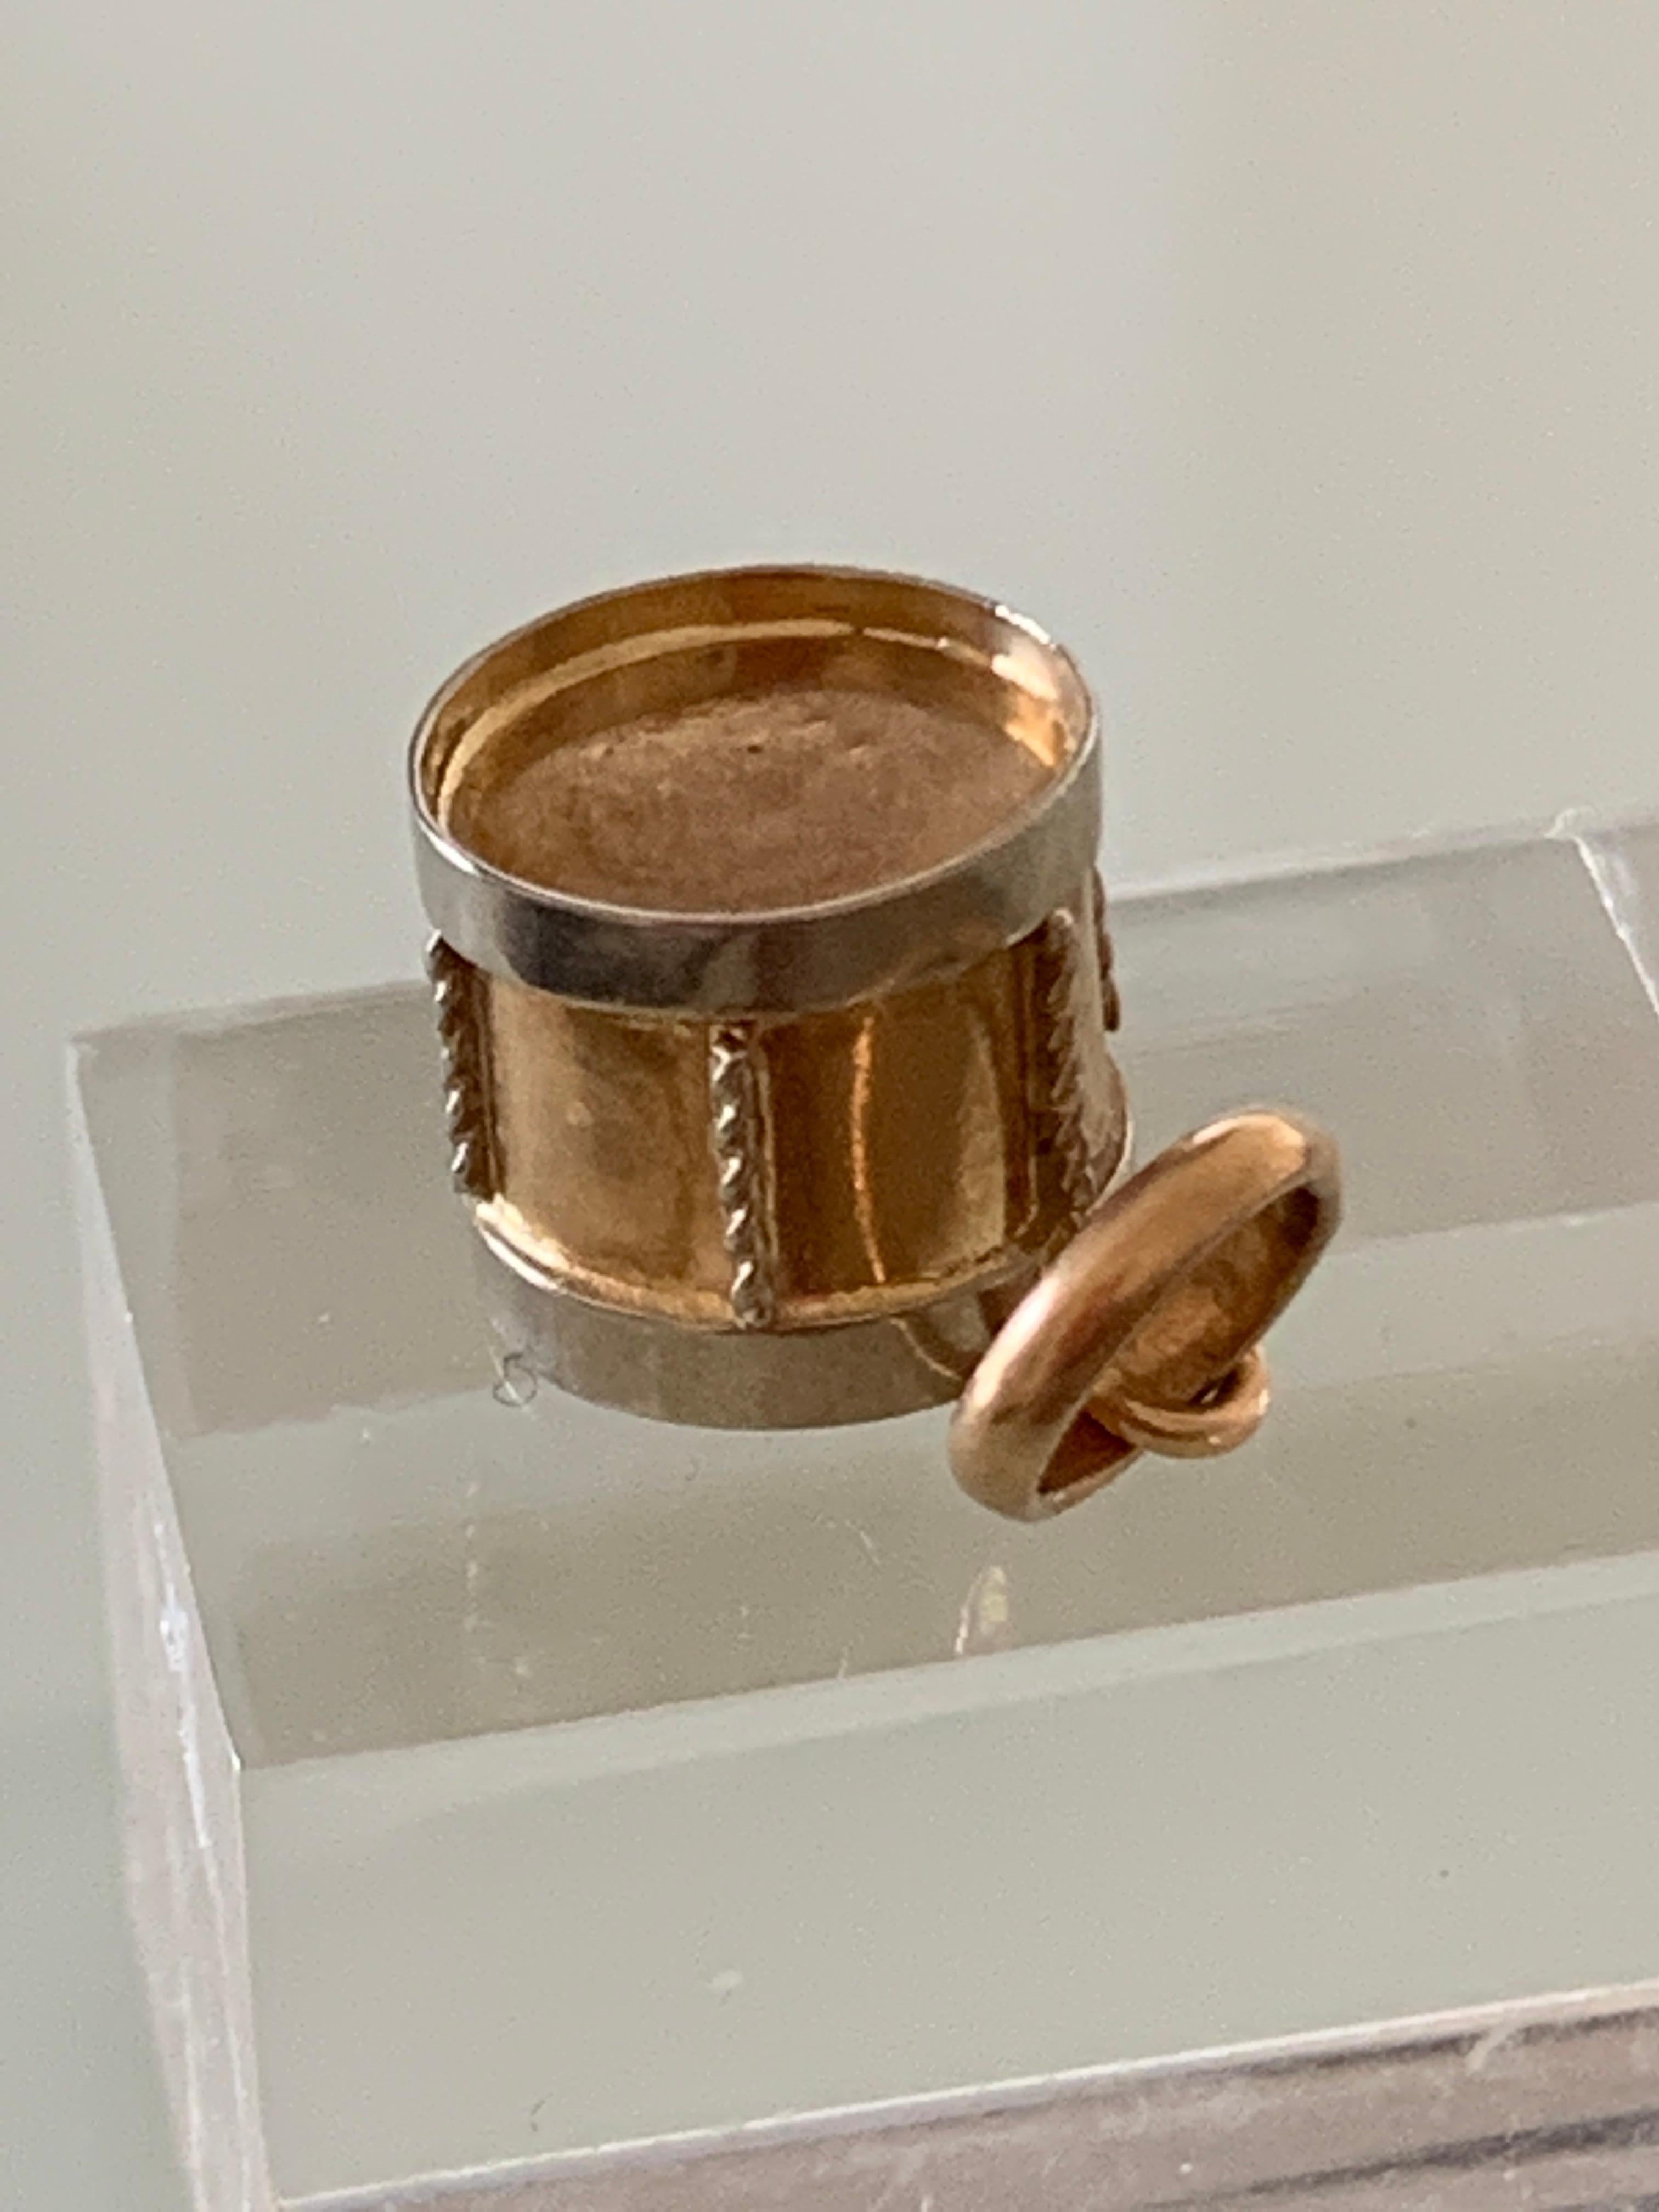 18ct 750 Gold Charm
Drum Design
Stamped 750 on bail and AR1 ( Italian province Arezzo)
Circa 1948 - 1968
Weight 2.48 grams ( item is hollow)
Size 10mm x 10mm (approx)